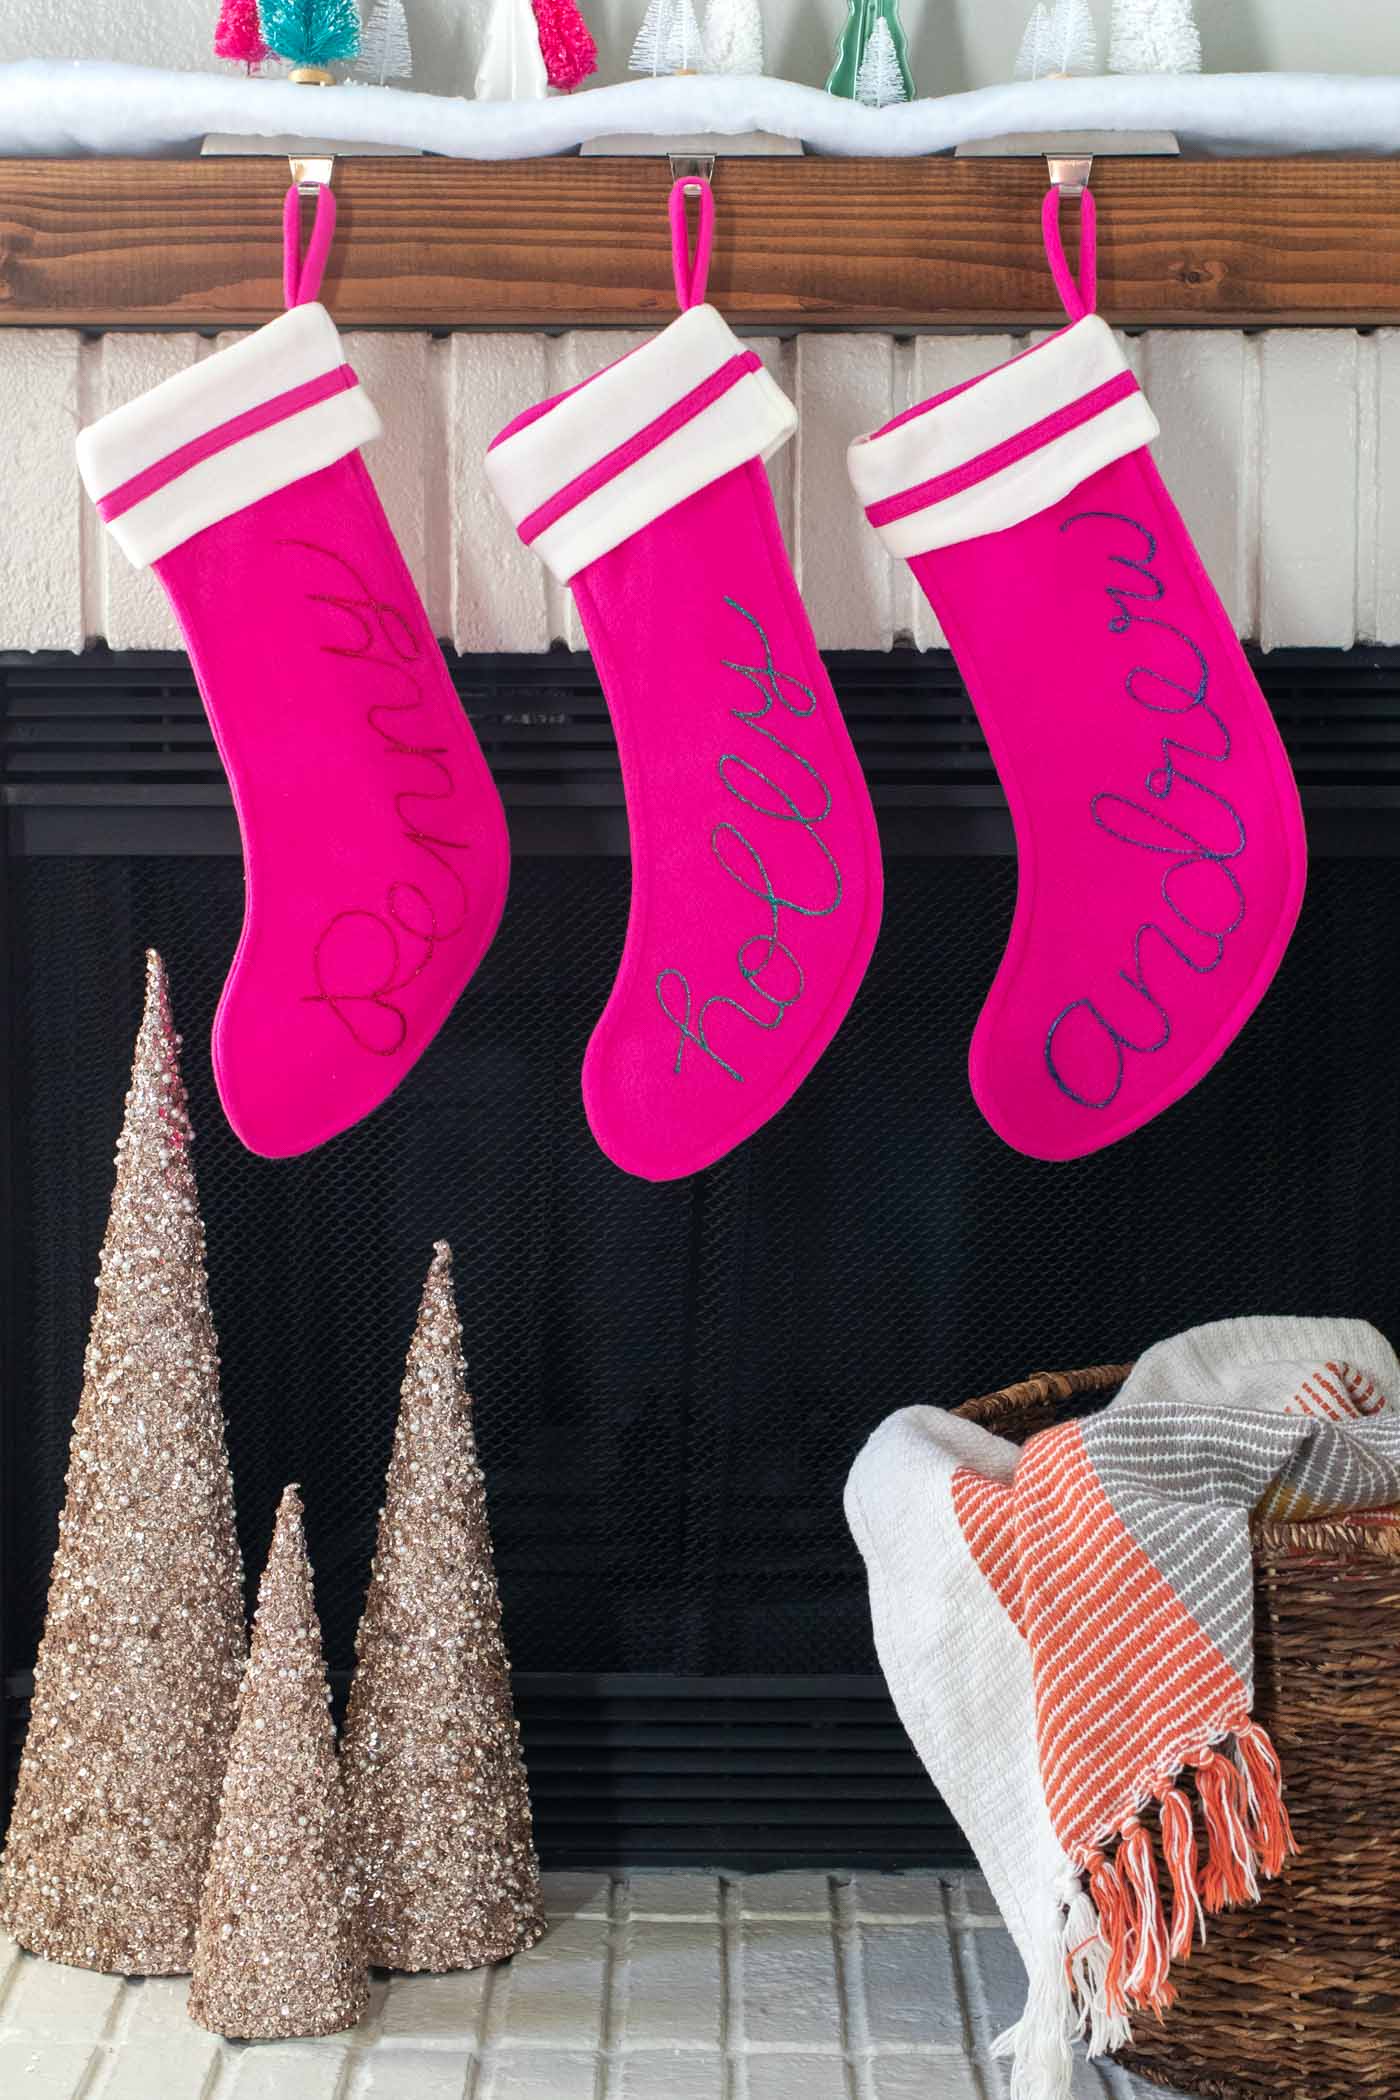 DIY Personalized Calligraphy Stockings // Decorate your mantel with new personalized stockings for the holidays! These DIY calligraphy stockings are easy to recreate with Tulip Dimensional Paints for everyone in your family this Christmas! #christmas #holidaydecor #stocking #stockingdiy #fabricpaint #painting #calligraphy #handlettering